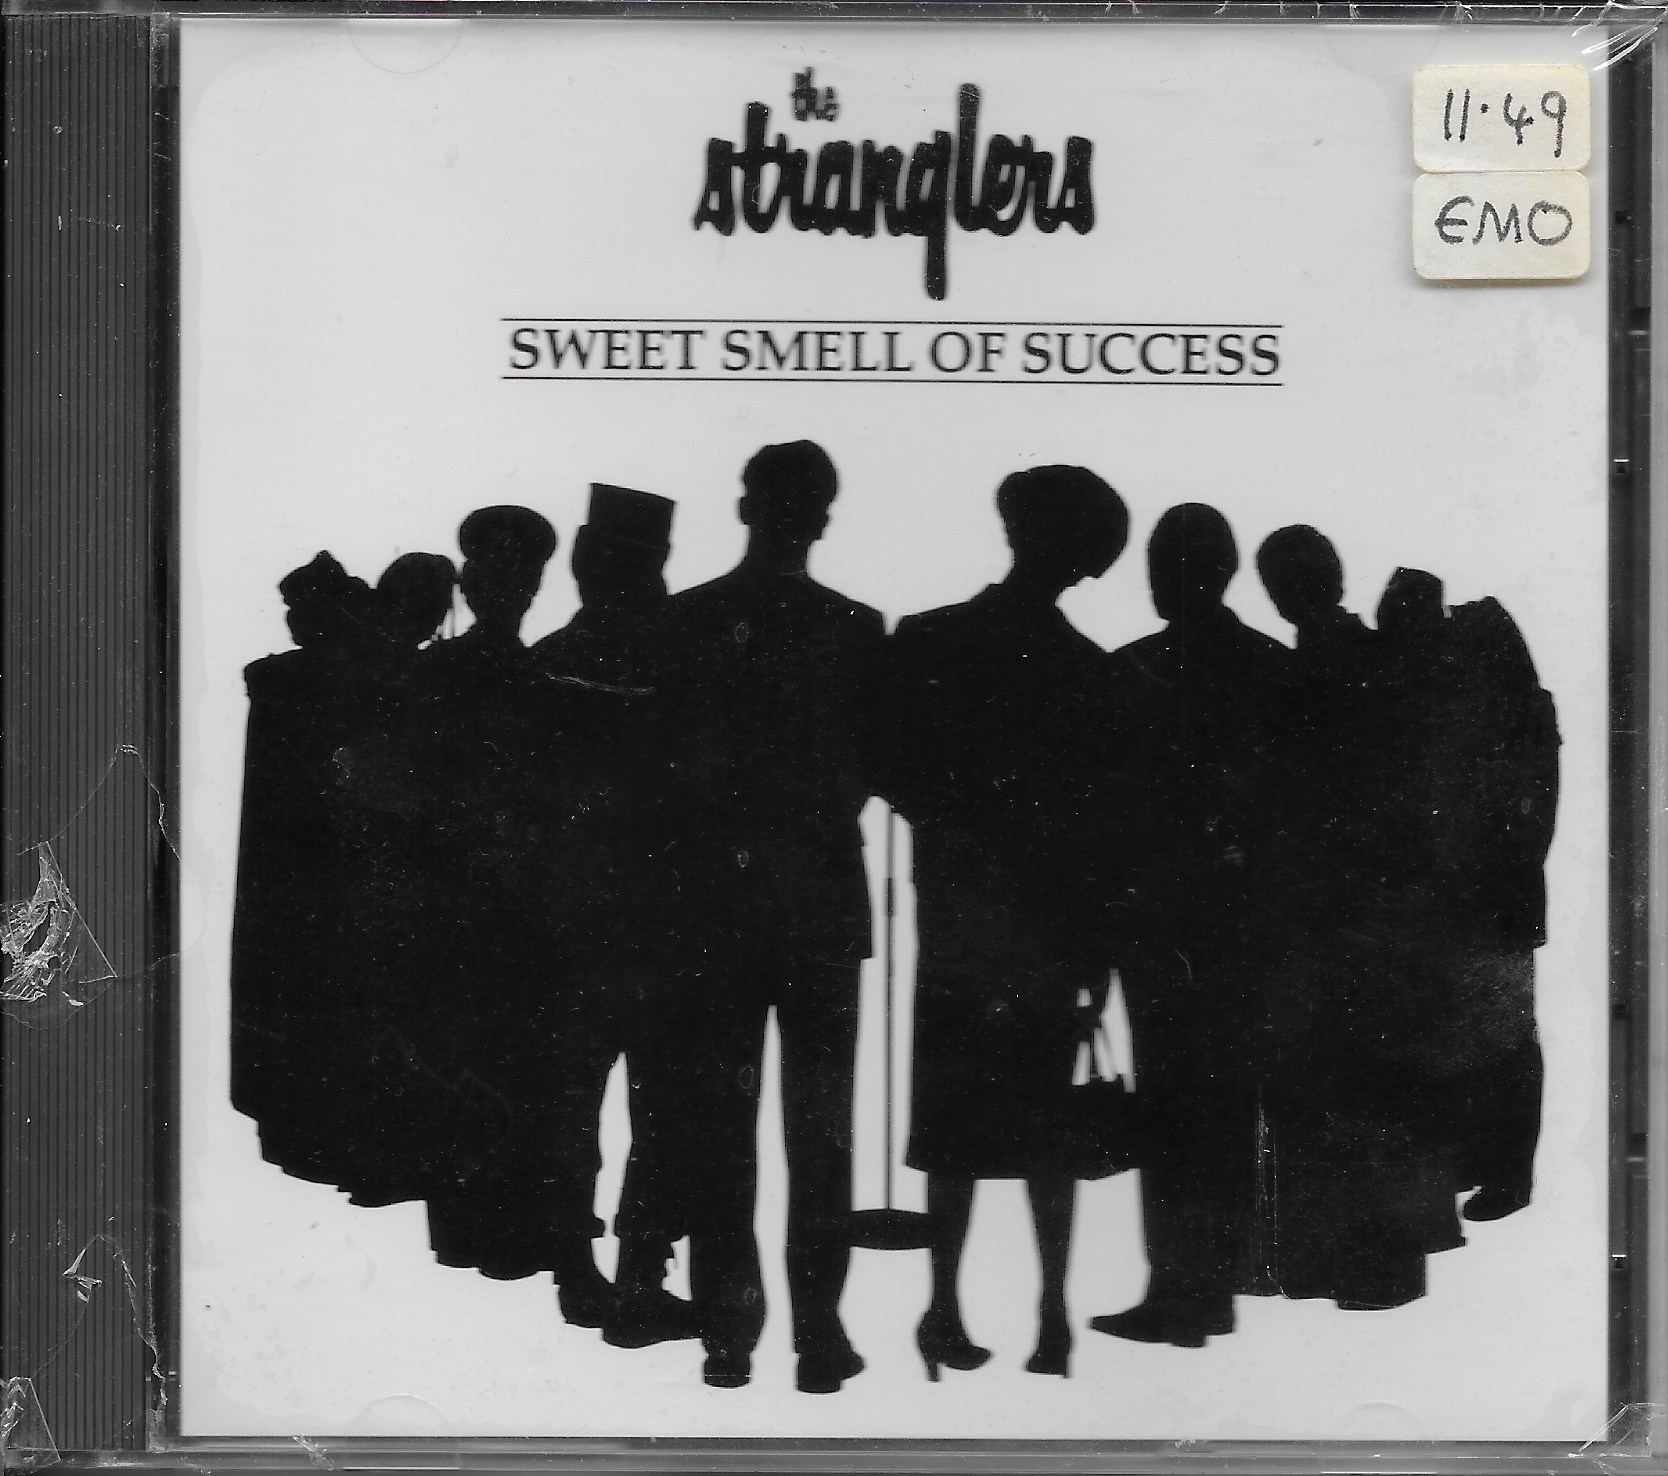 Picture of ESK 2067 Sweet smell of success - US import by artist The Stranglers from The Stranglers cdsingles